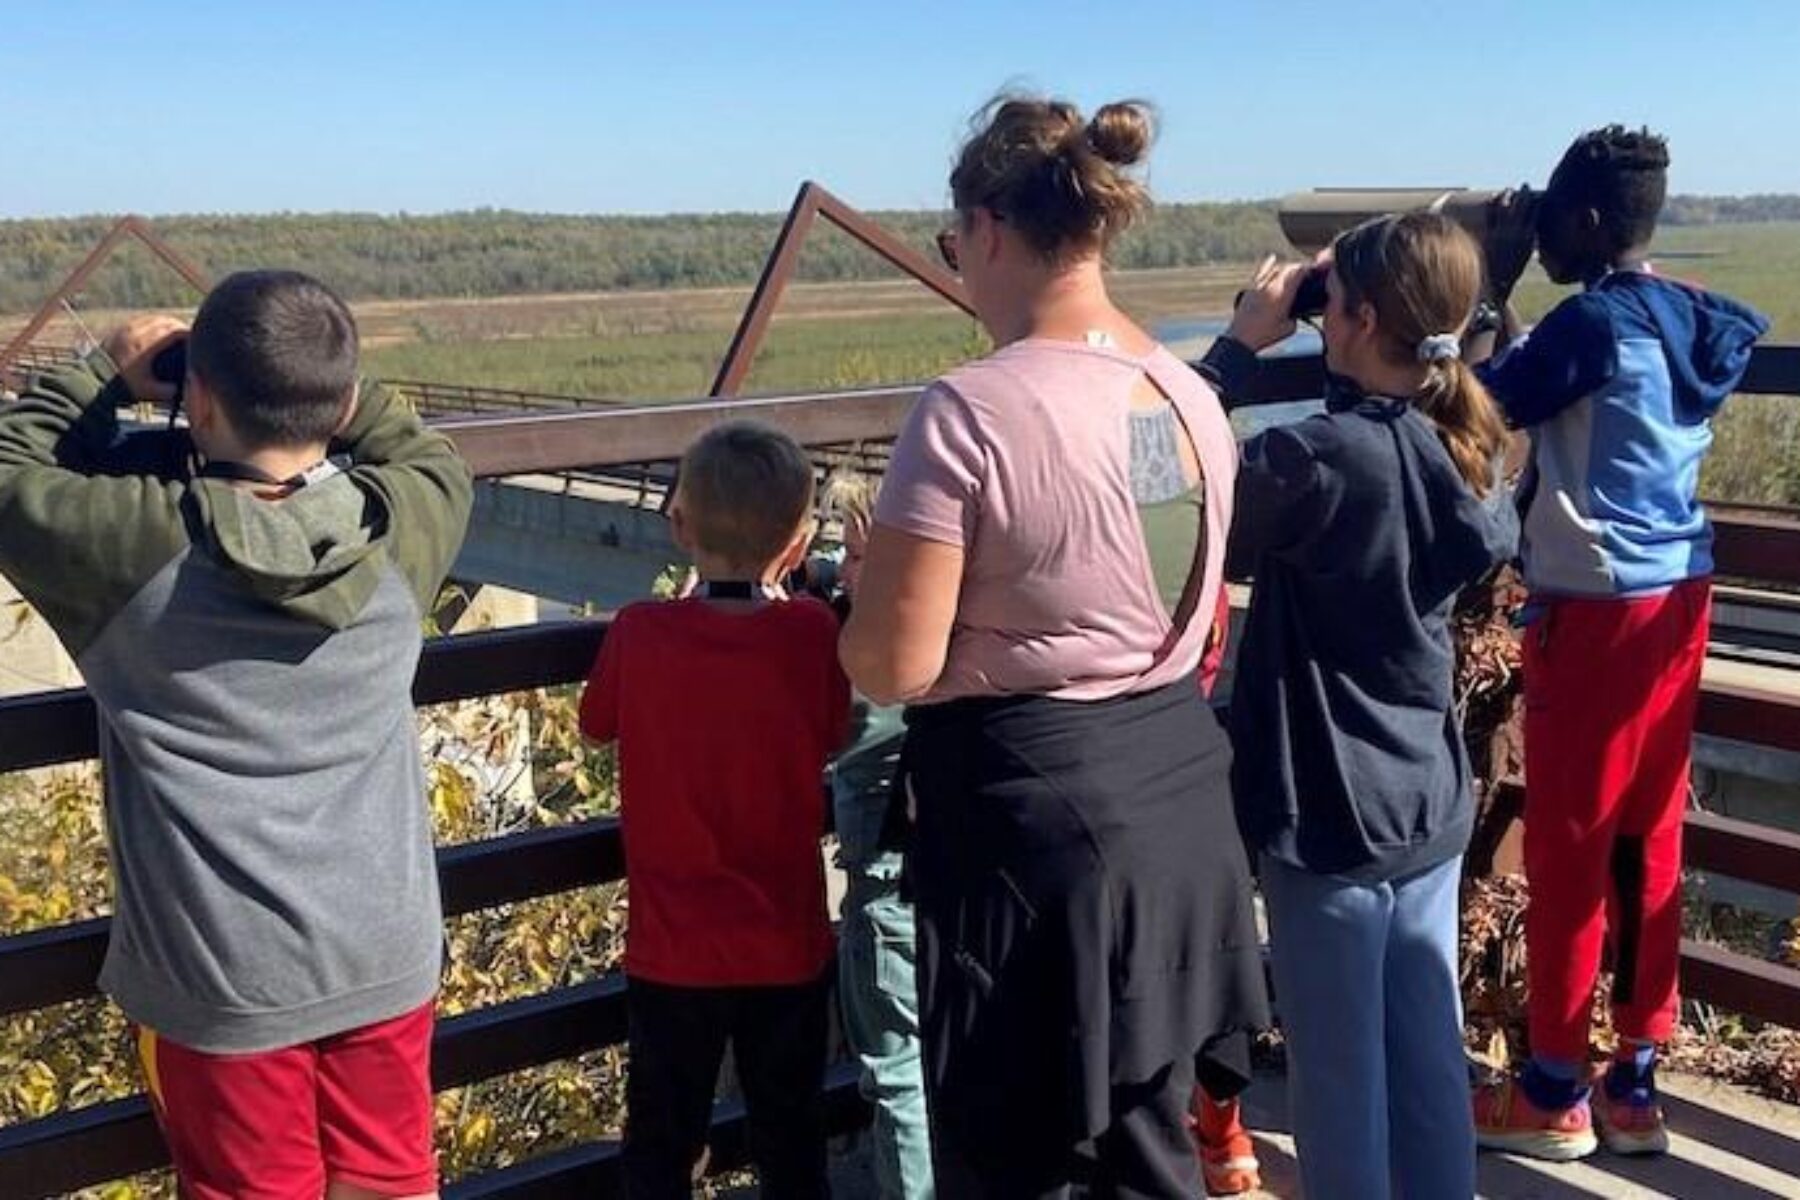 Iowa's High Trestle Trail overlook | Photo by Kyle Neuendorf, courtesy Boone County Conservation Department